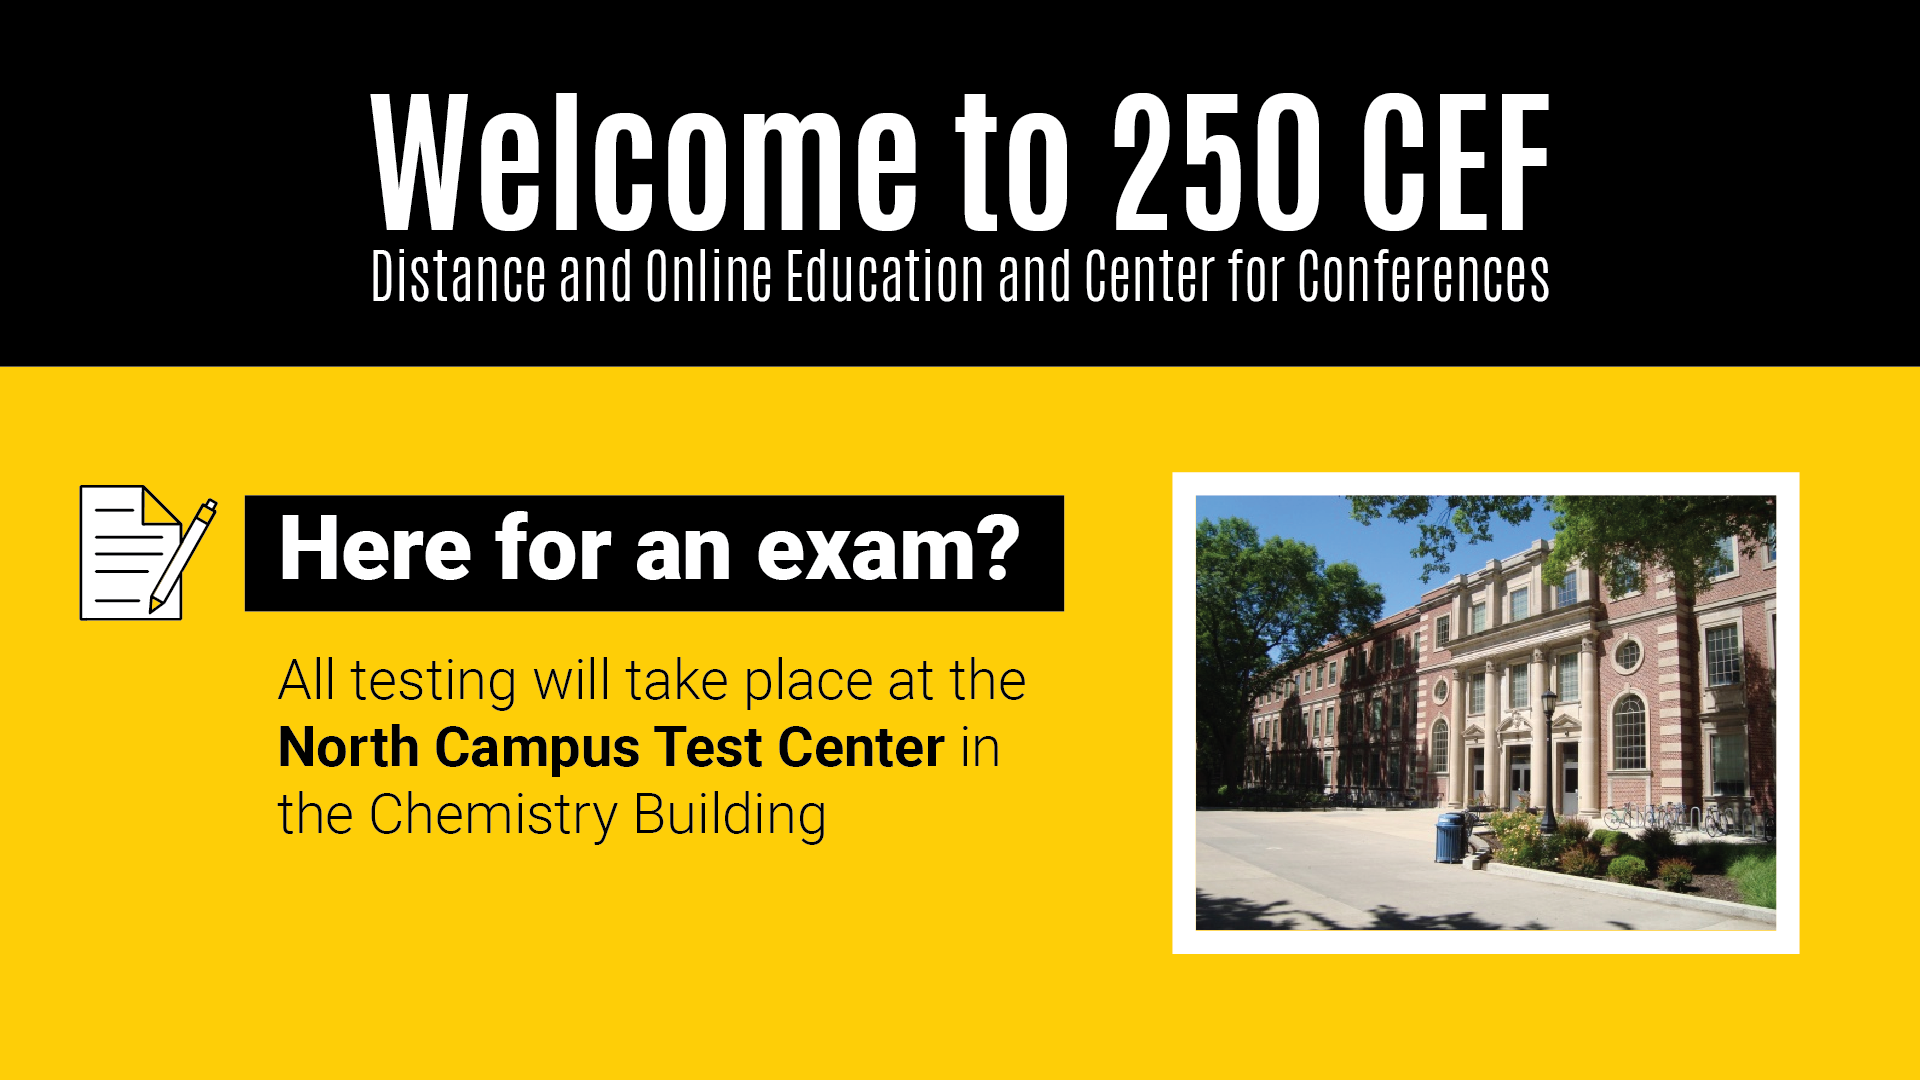 Welcome to 250 CEF